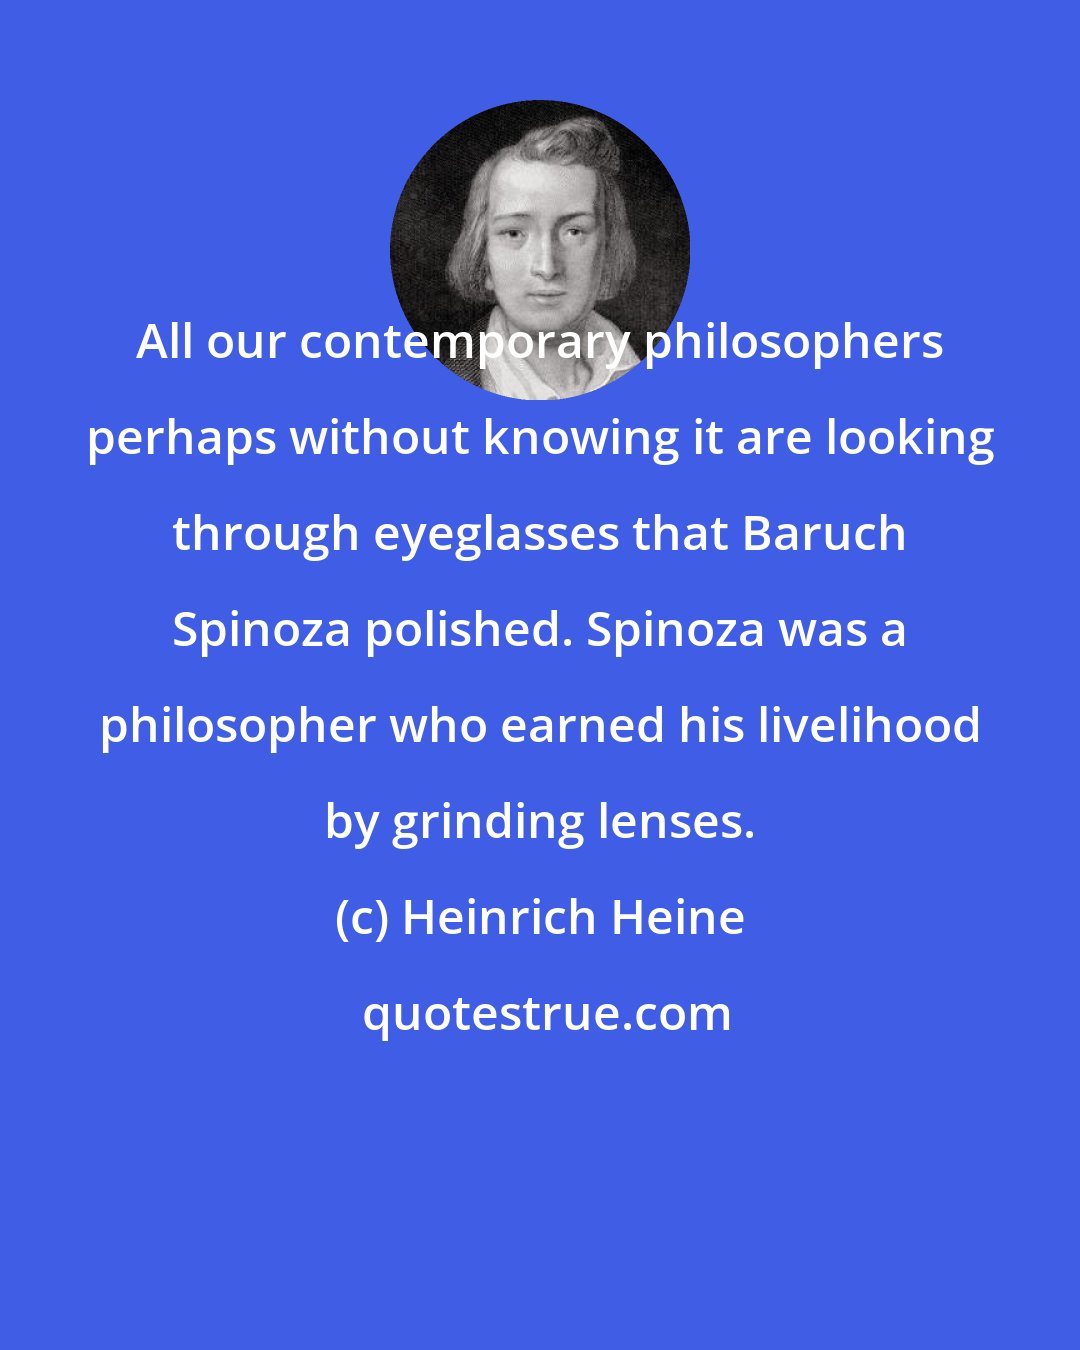 Heinrich Heine: All our contemporary philosophers perhaps without knowing it are looking through eyeglasses that Baruch Spinoza polished. Spinoza was a philosopher who earned his livelihood by grinding lenses.